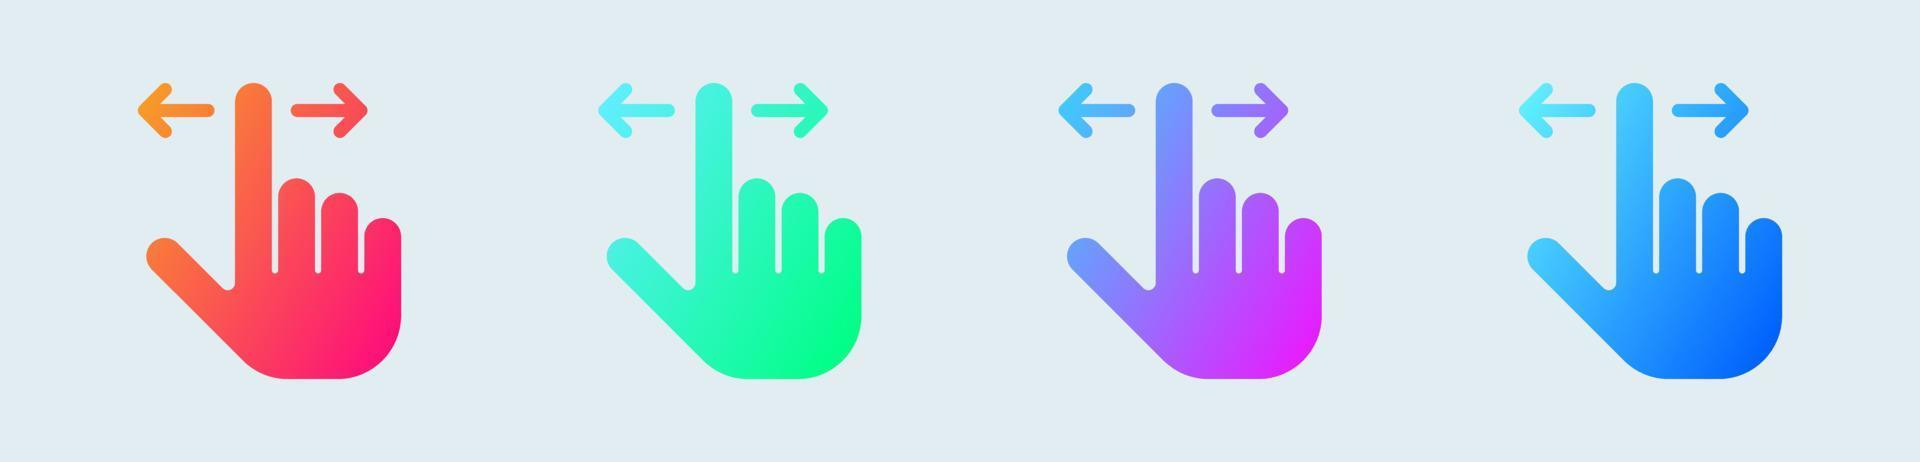 Gesture solid icon in gradient colors. Touch signs vector illustration.